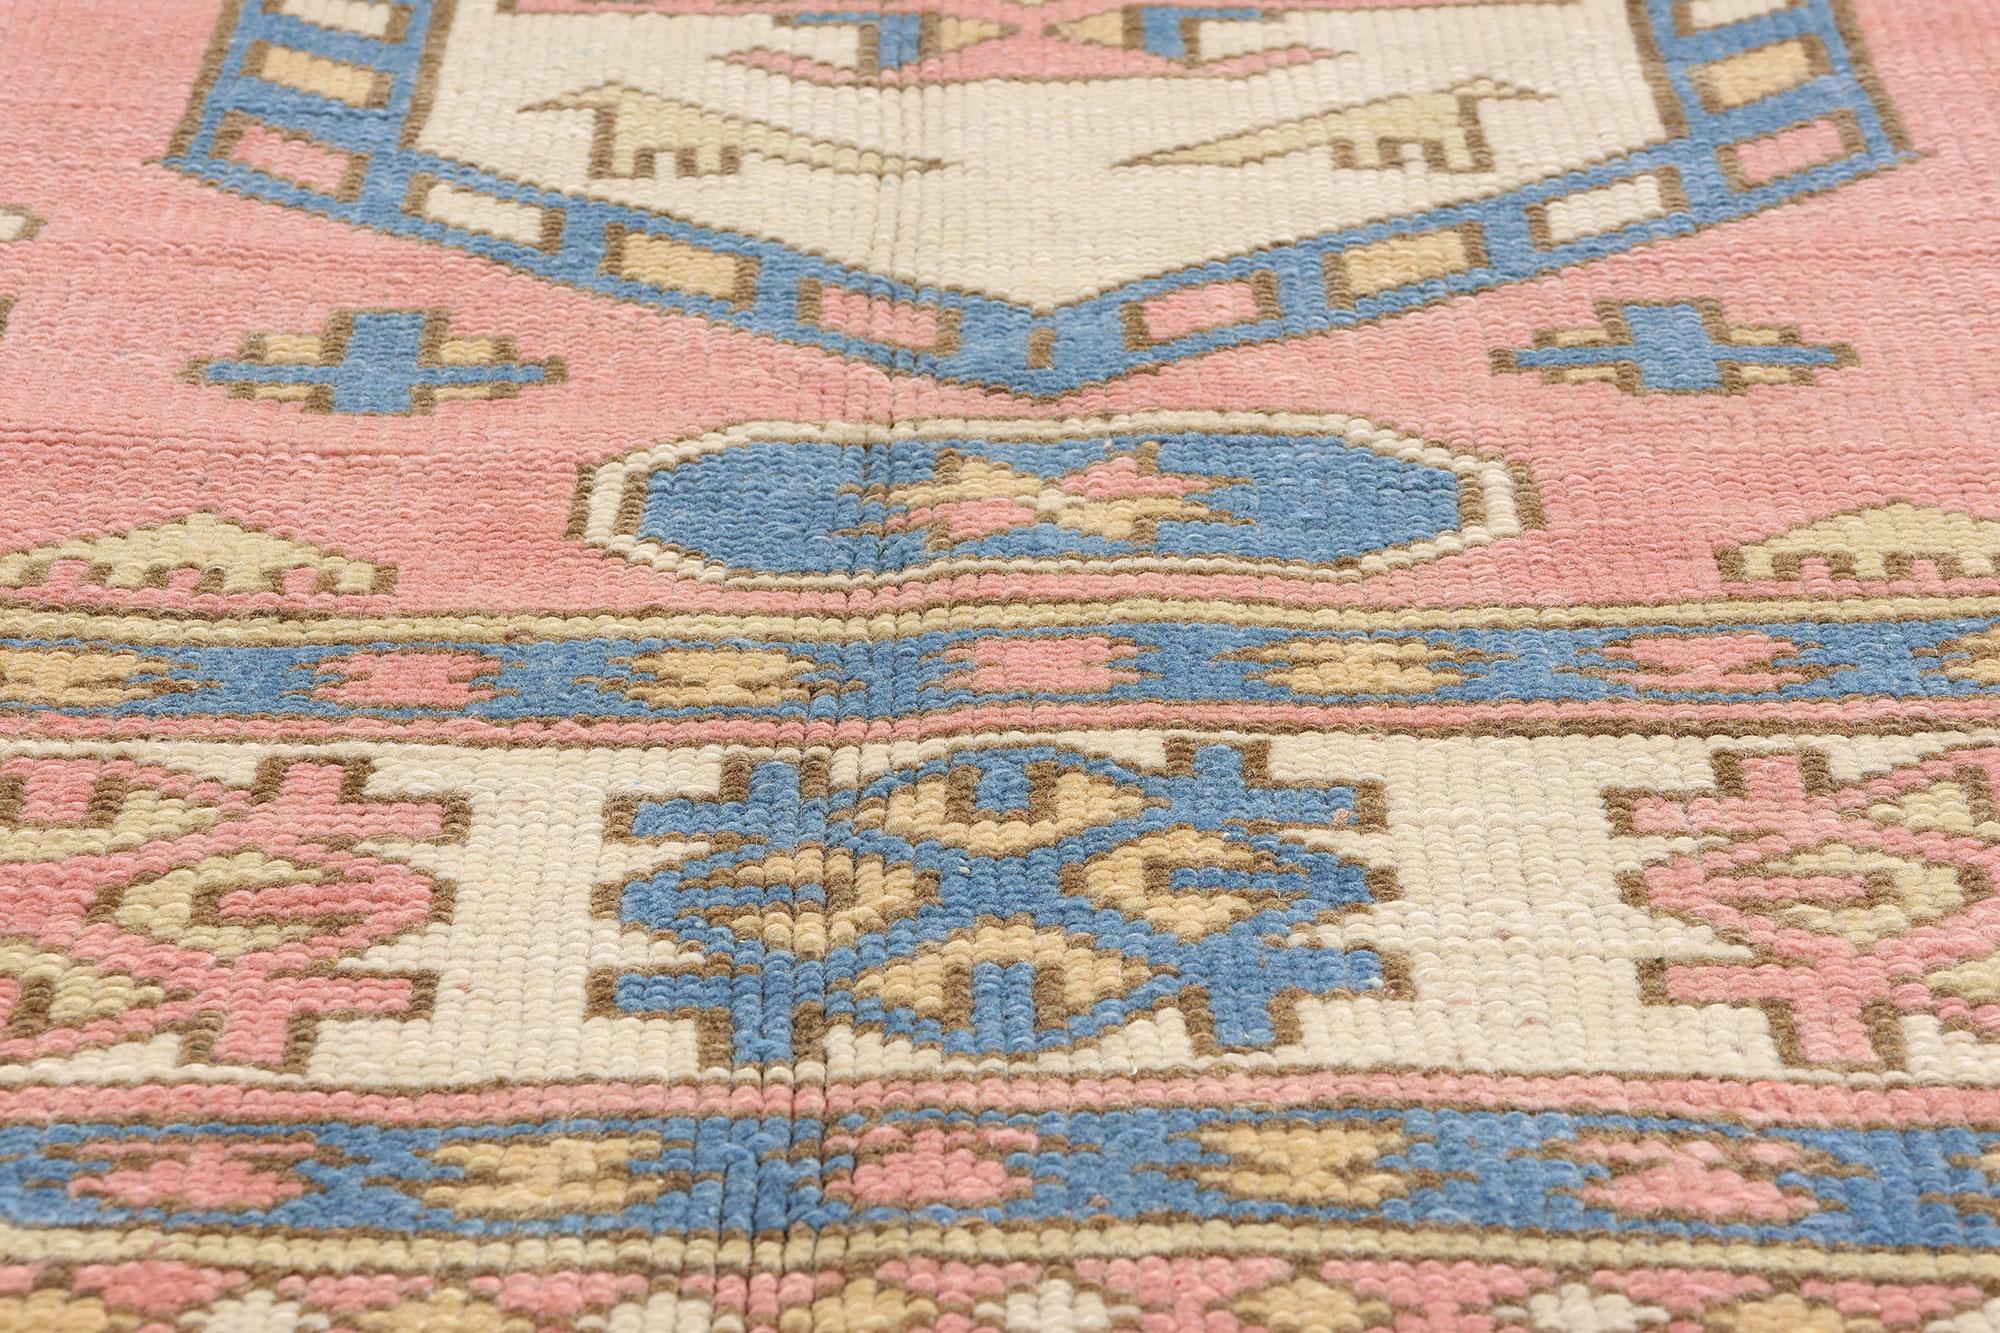 Vintage Pink Persian Hamadan Rug, Boho Chic Meets Tribal Enchantment In Good Condition For Sale In Dallas, TX